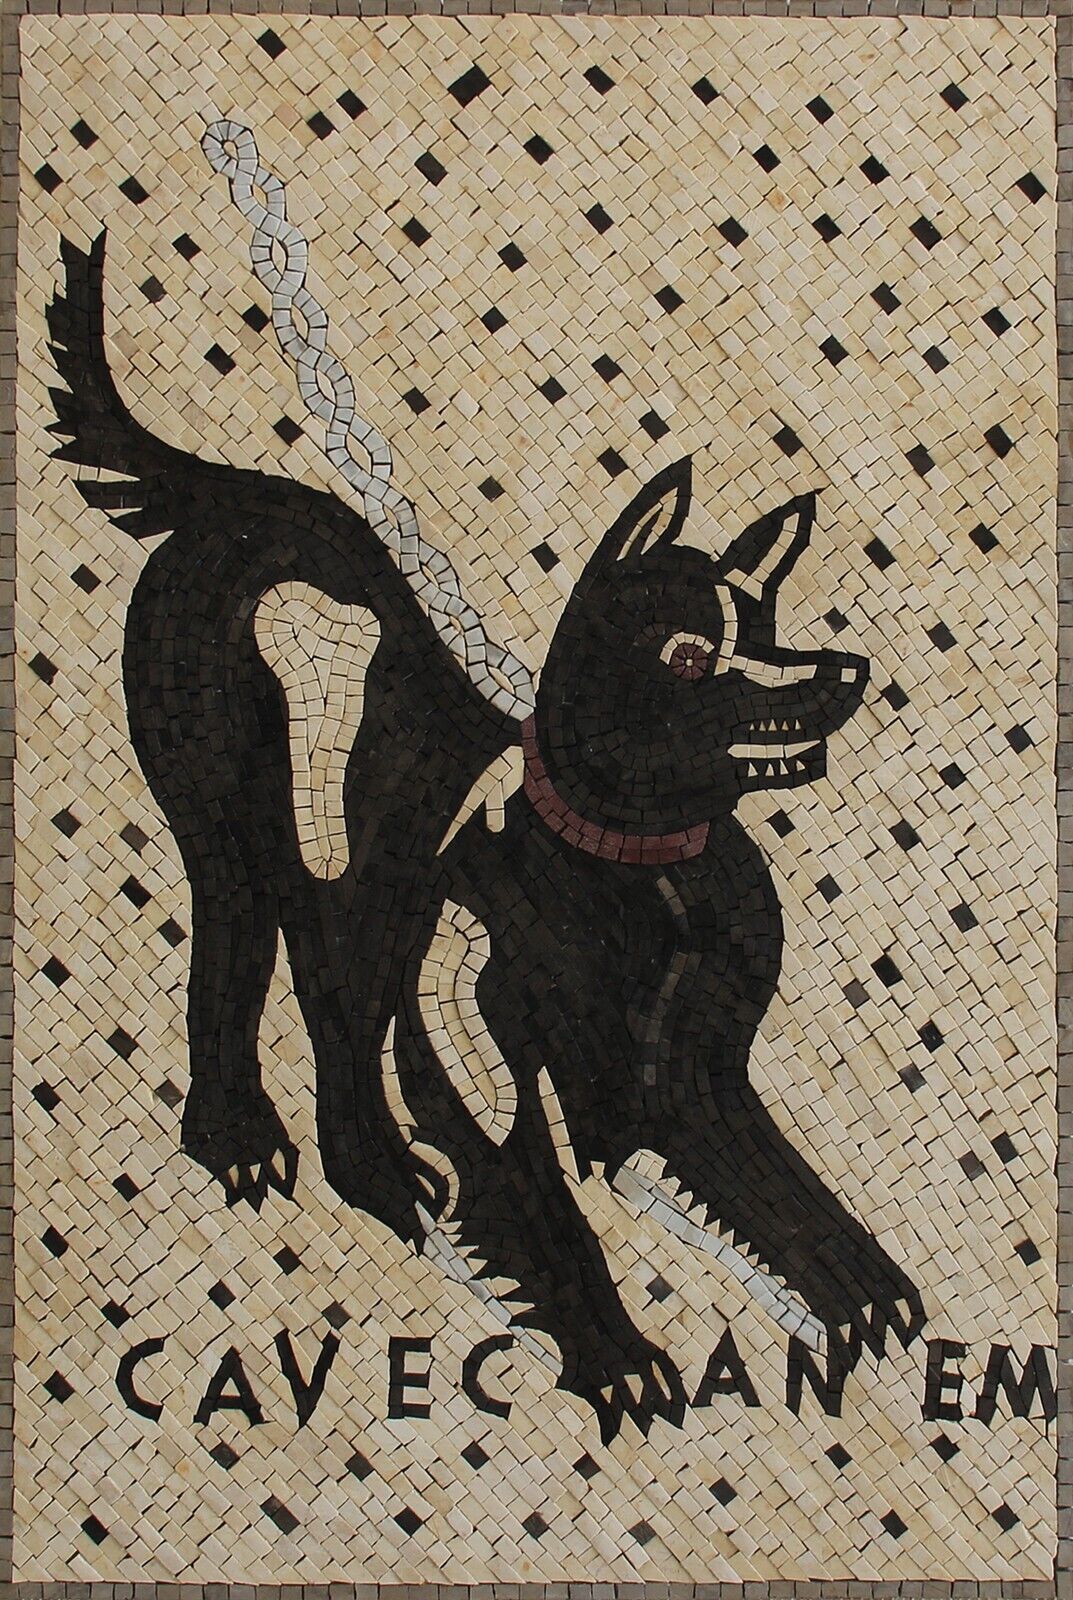 Pompeii Marble Mosaic Beware of Dog Cave Canem Tile Art 24x36 Inches